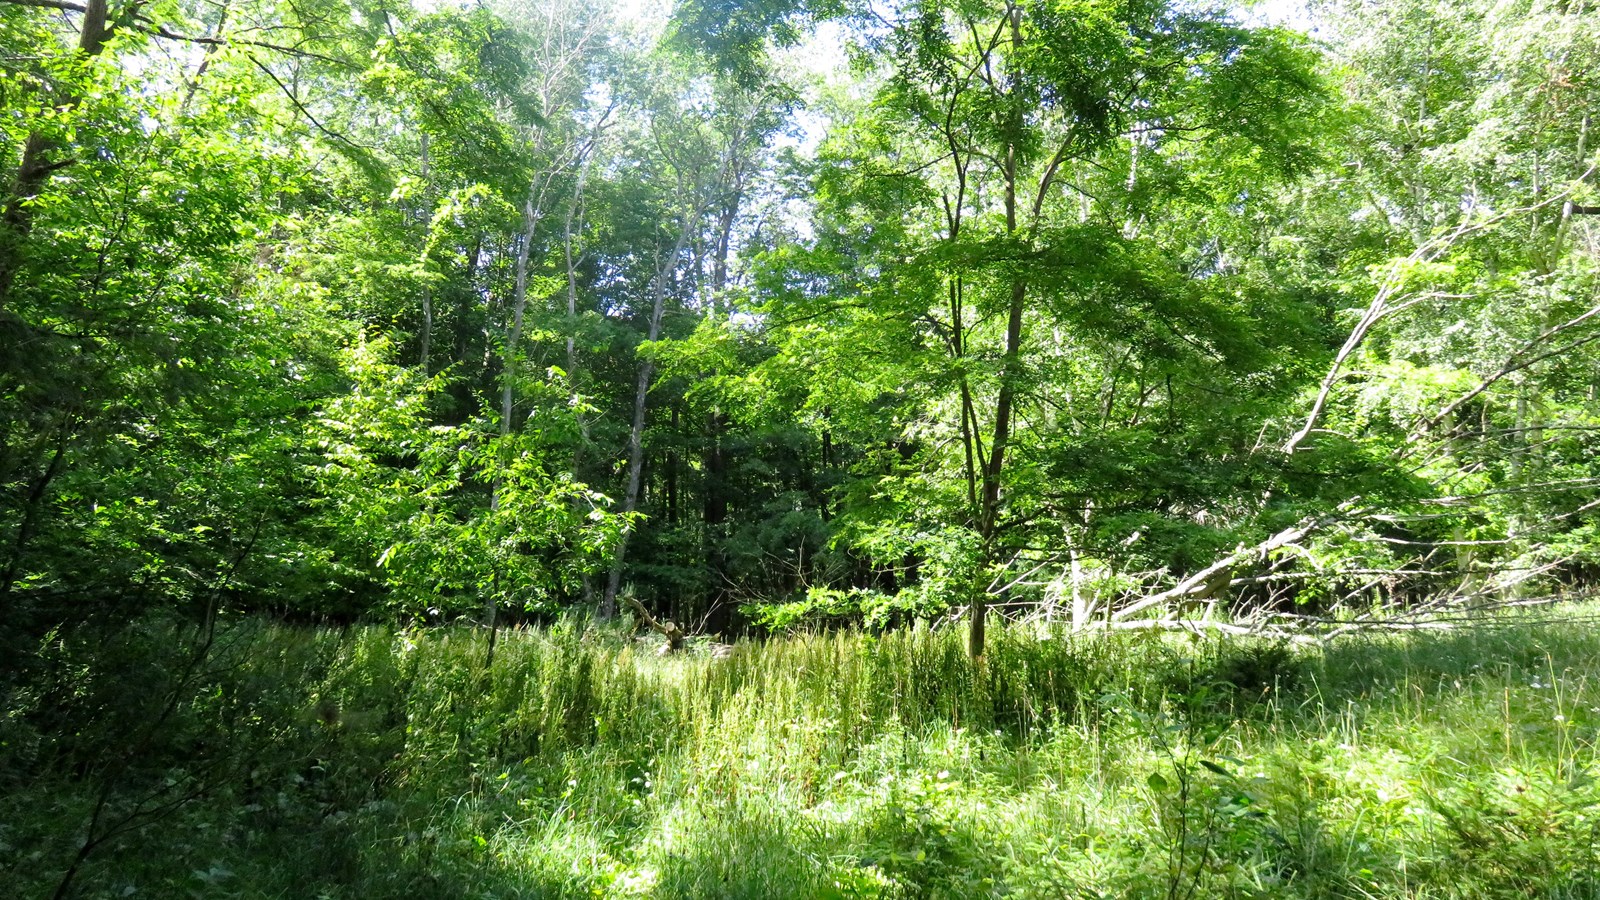 Green clearing with long grasses backing onto a forest